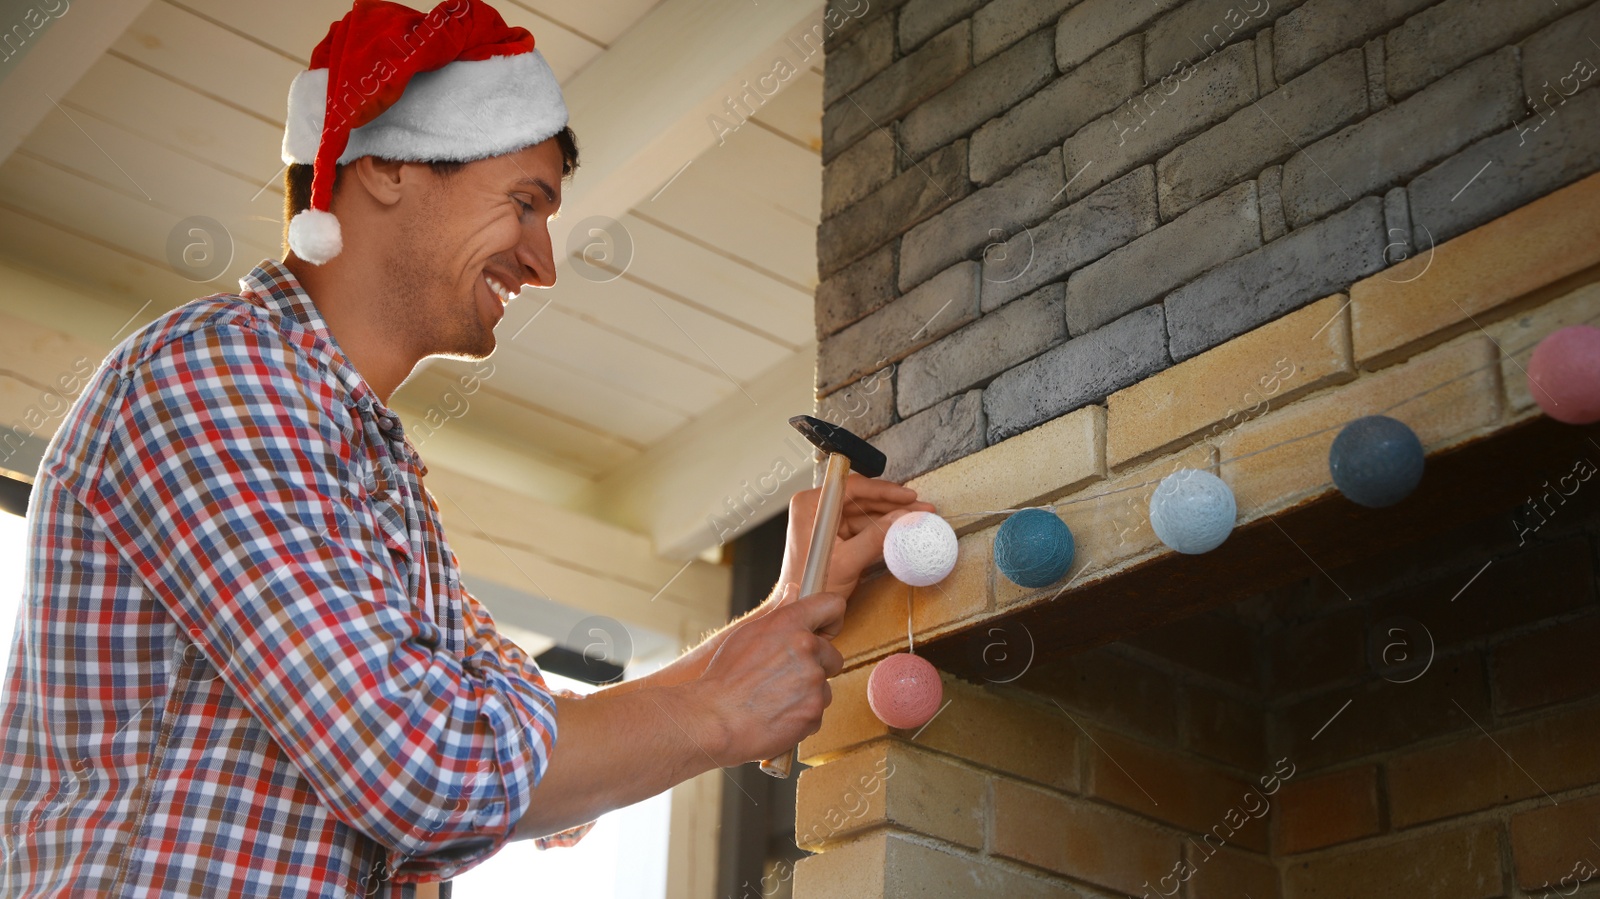 Photo of Man in Santa hat decorating fireplace in house with Christmas lights